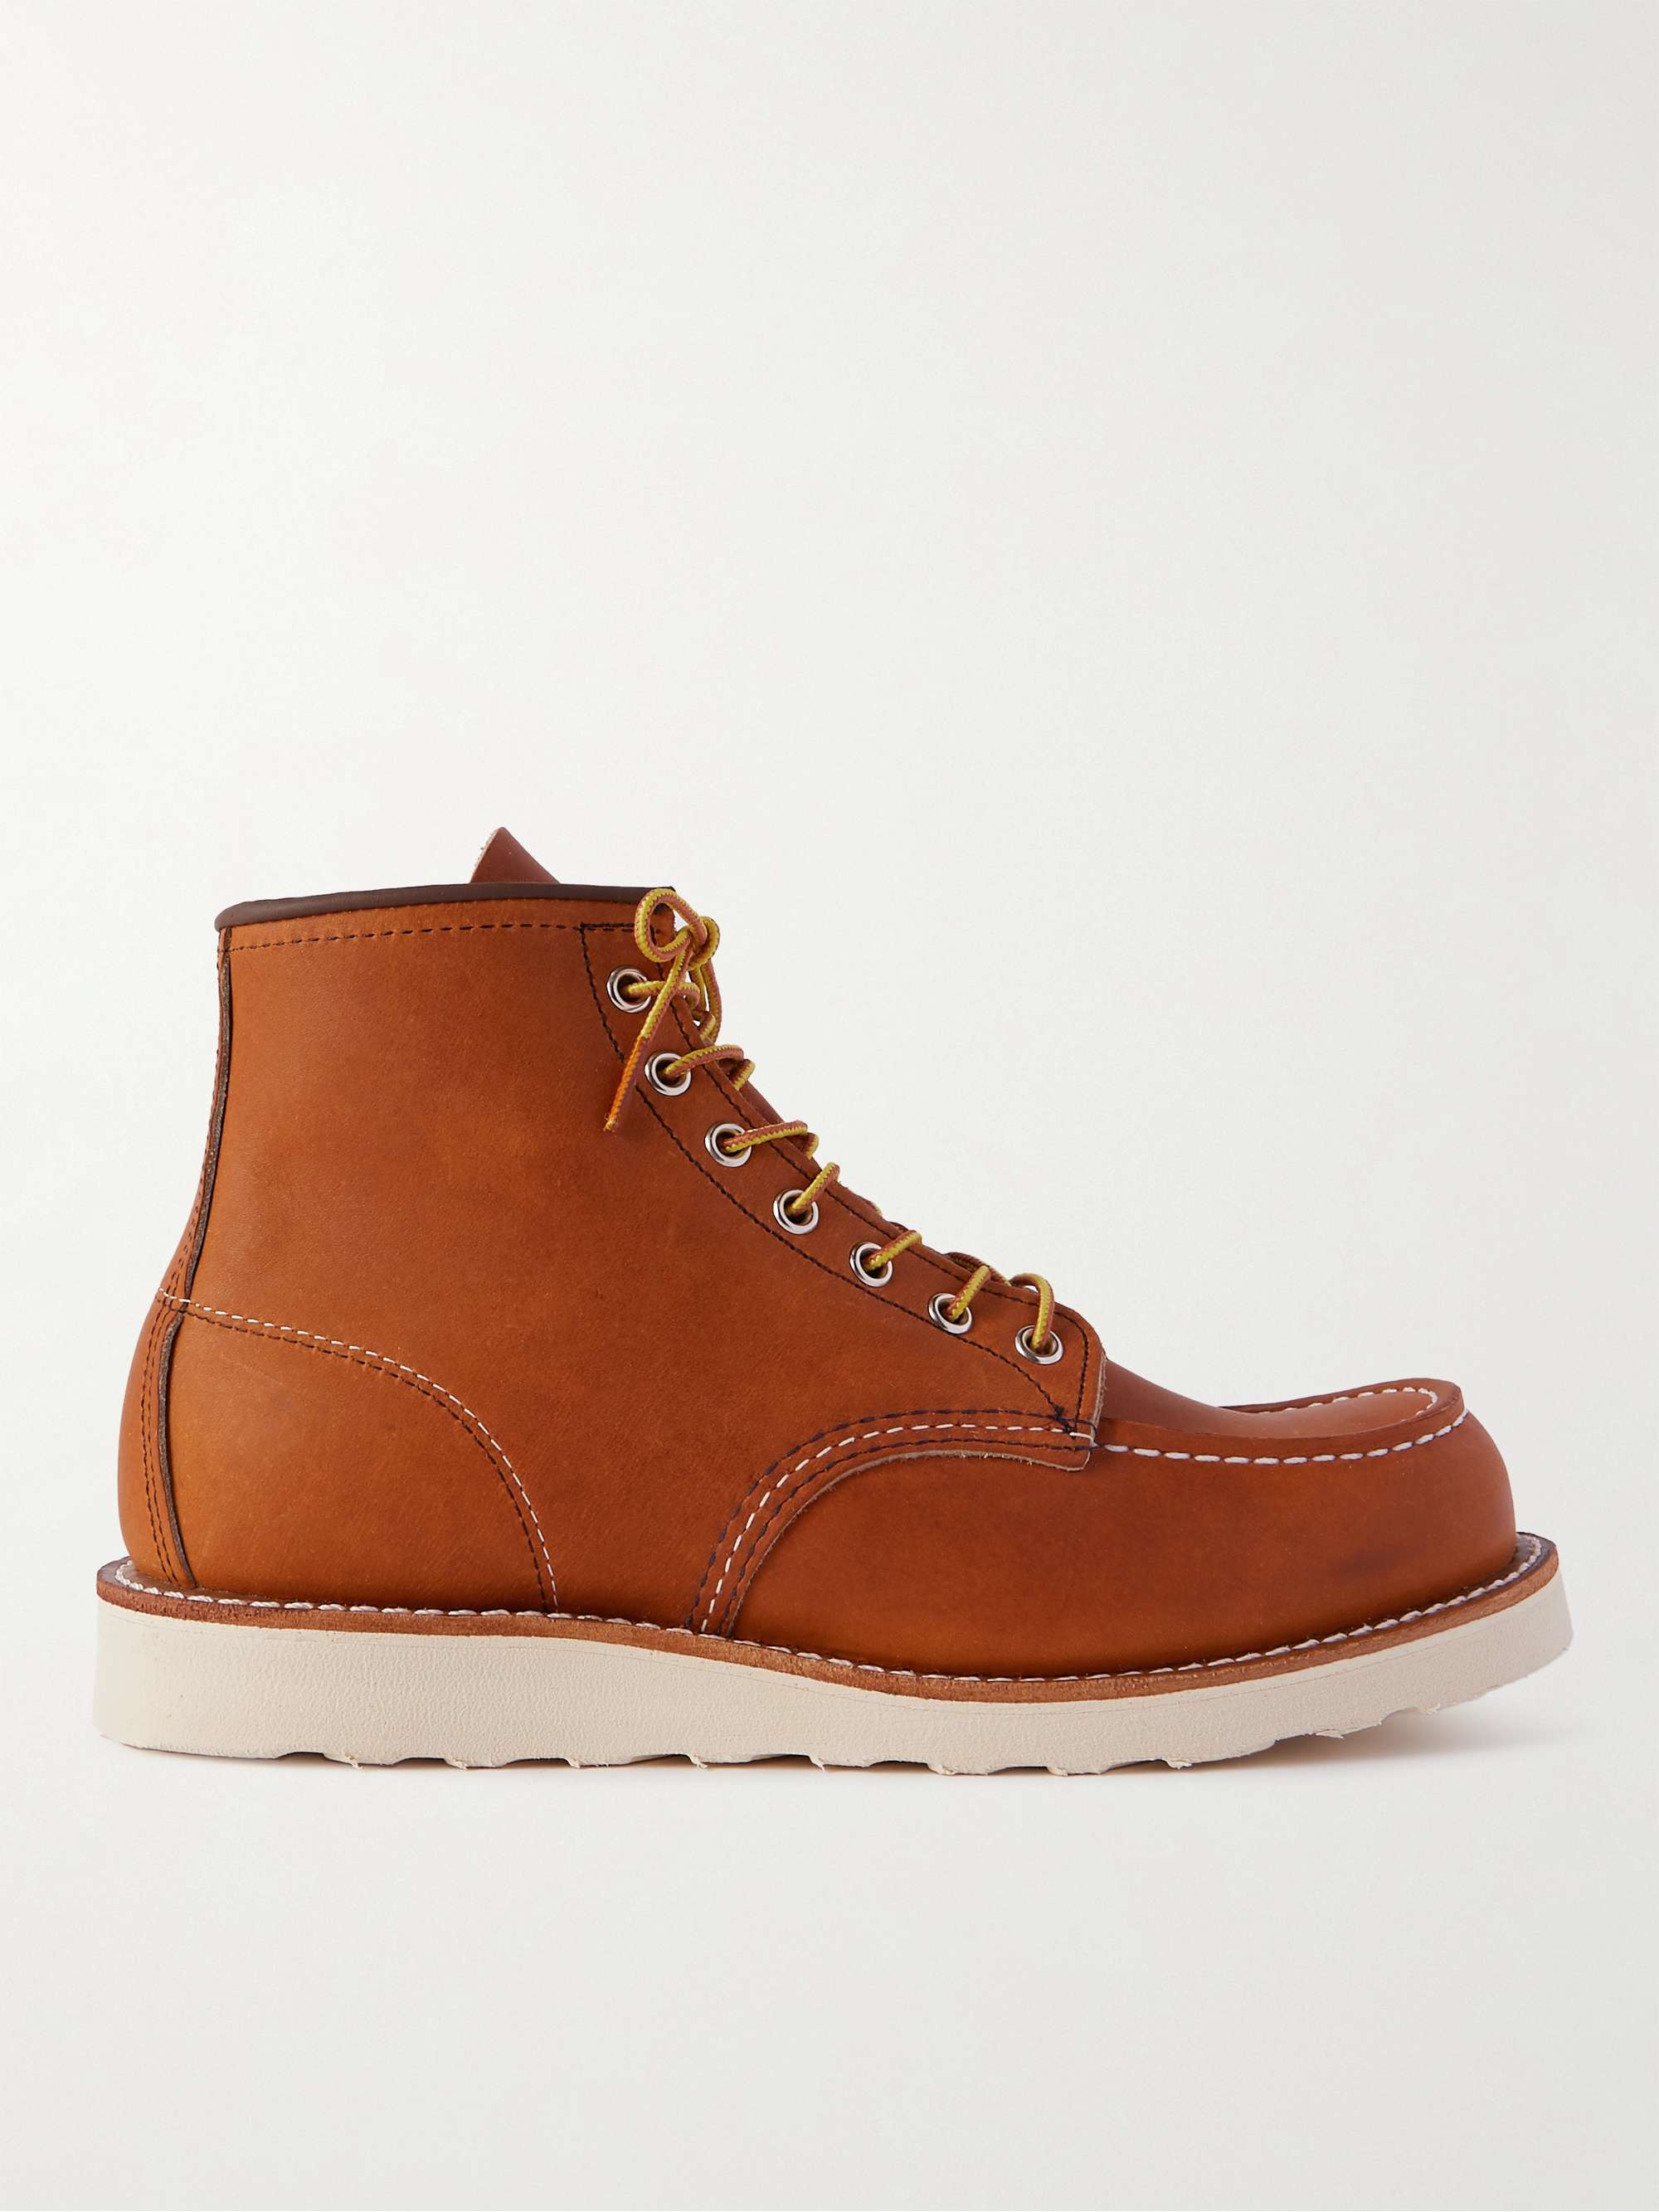 Red Wing Moccasin Boot | lupon.gov.ph